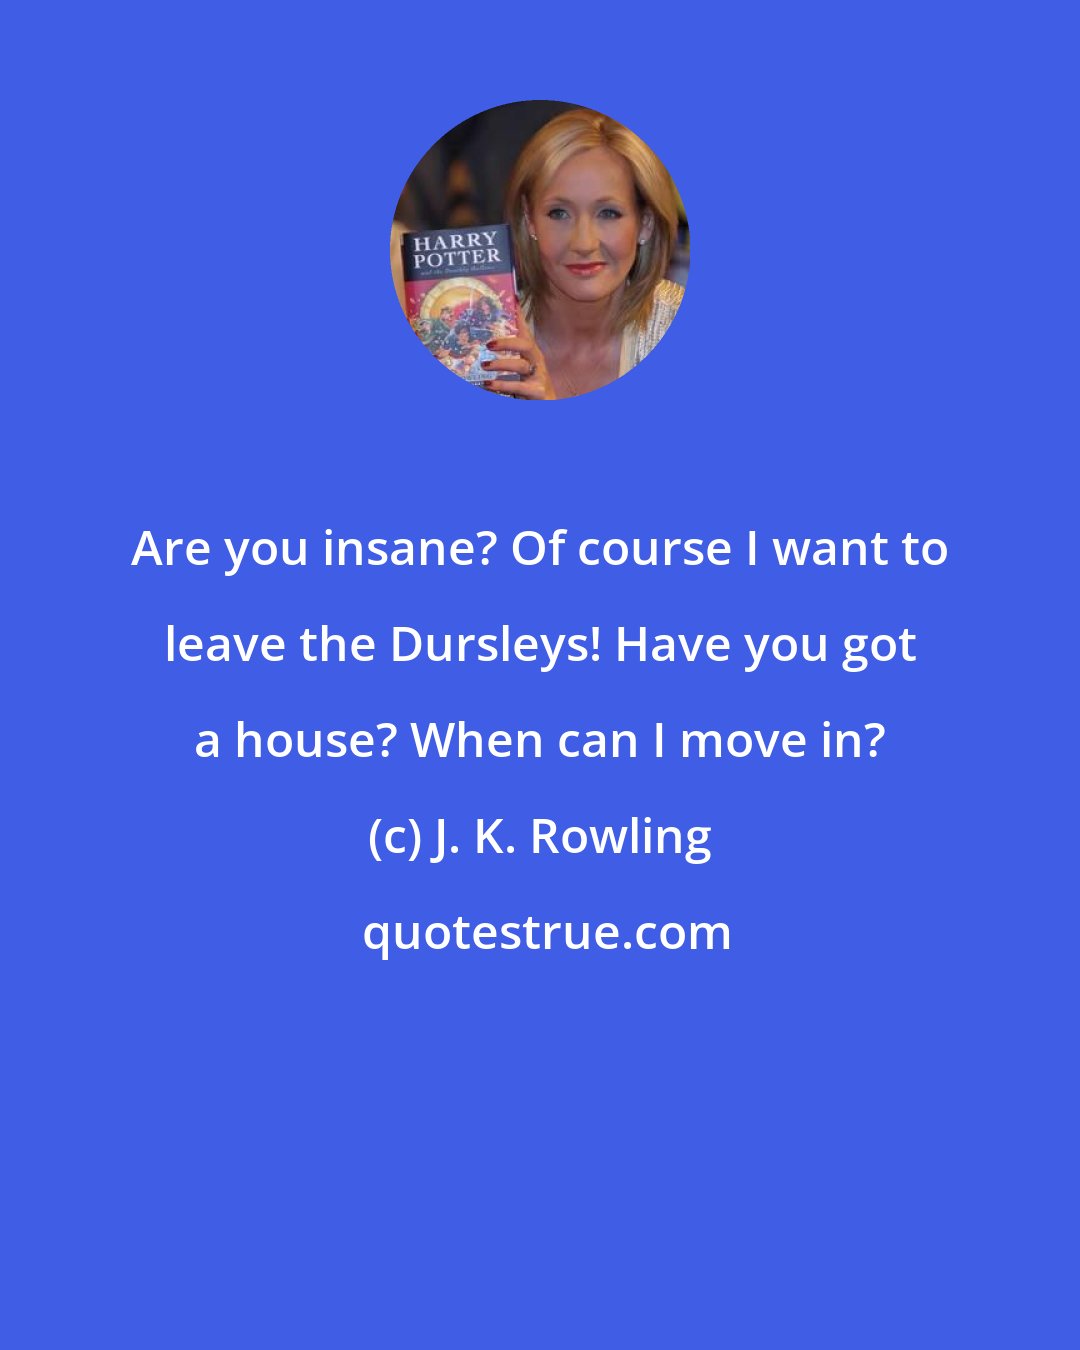 J. K. Rowling: Are you insane? Of course I want to leave the Dursleys! Have you got a house? When can I move in?